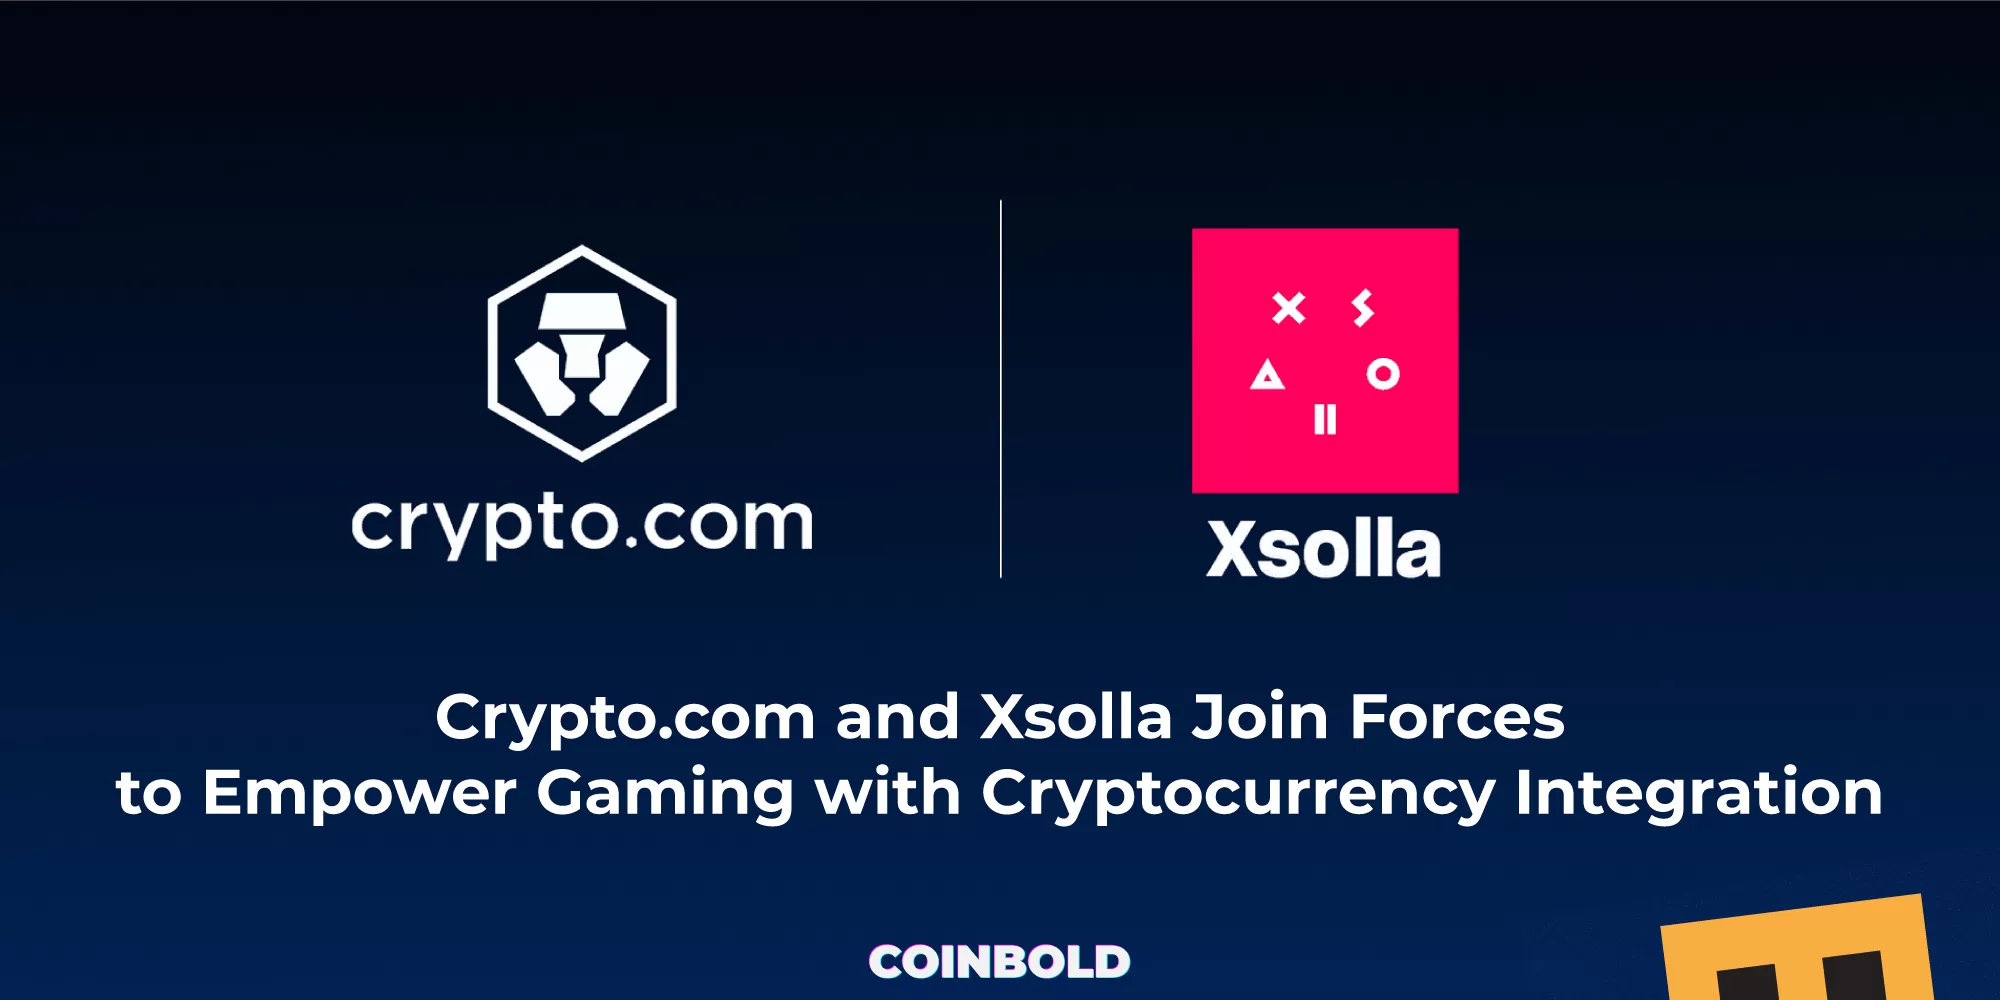 Crypto.com and Xsolla Join Forces to Empower Gaming with Cryptocurrency Integration